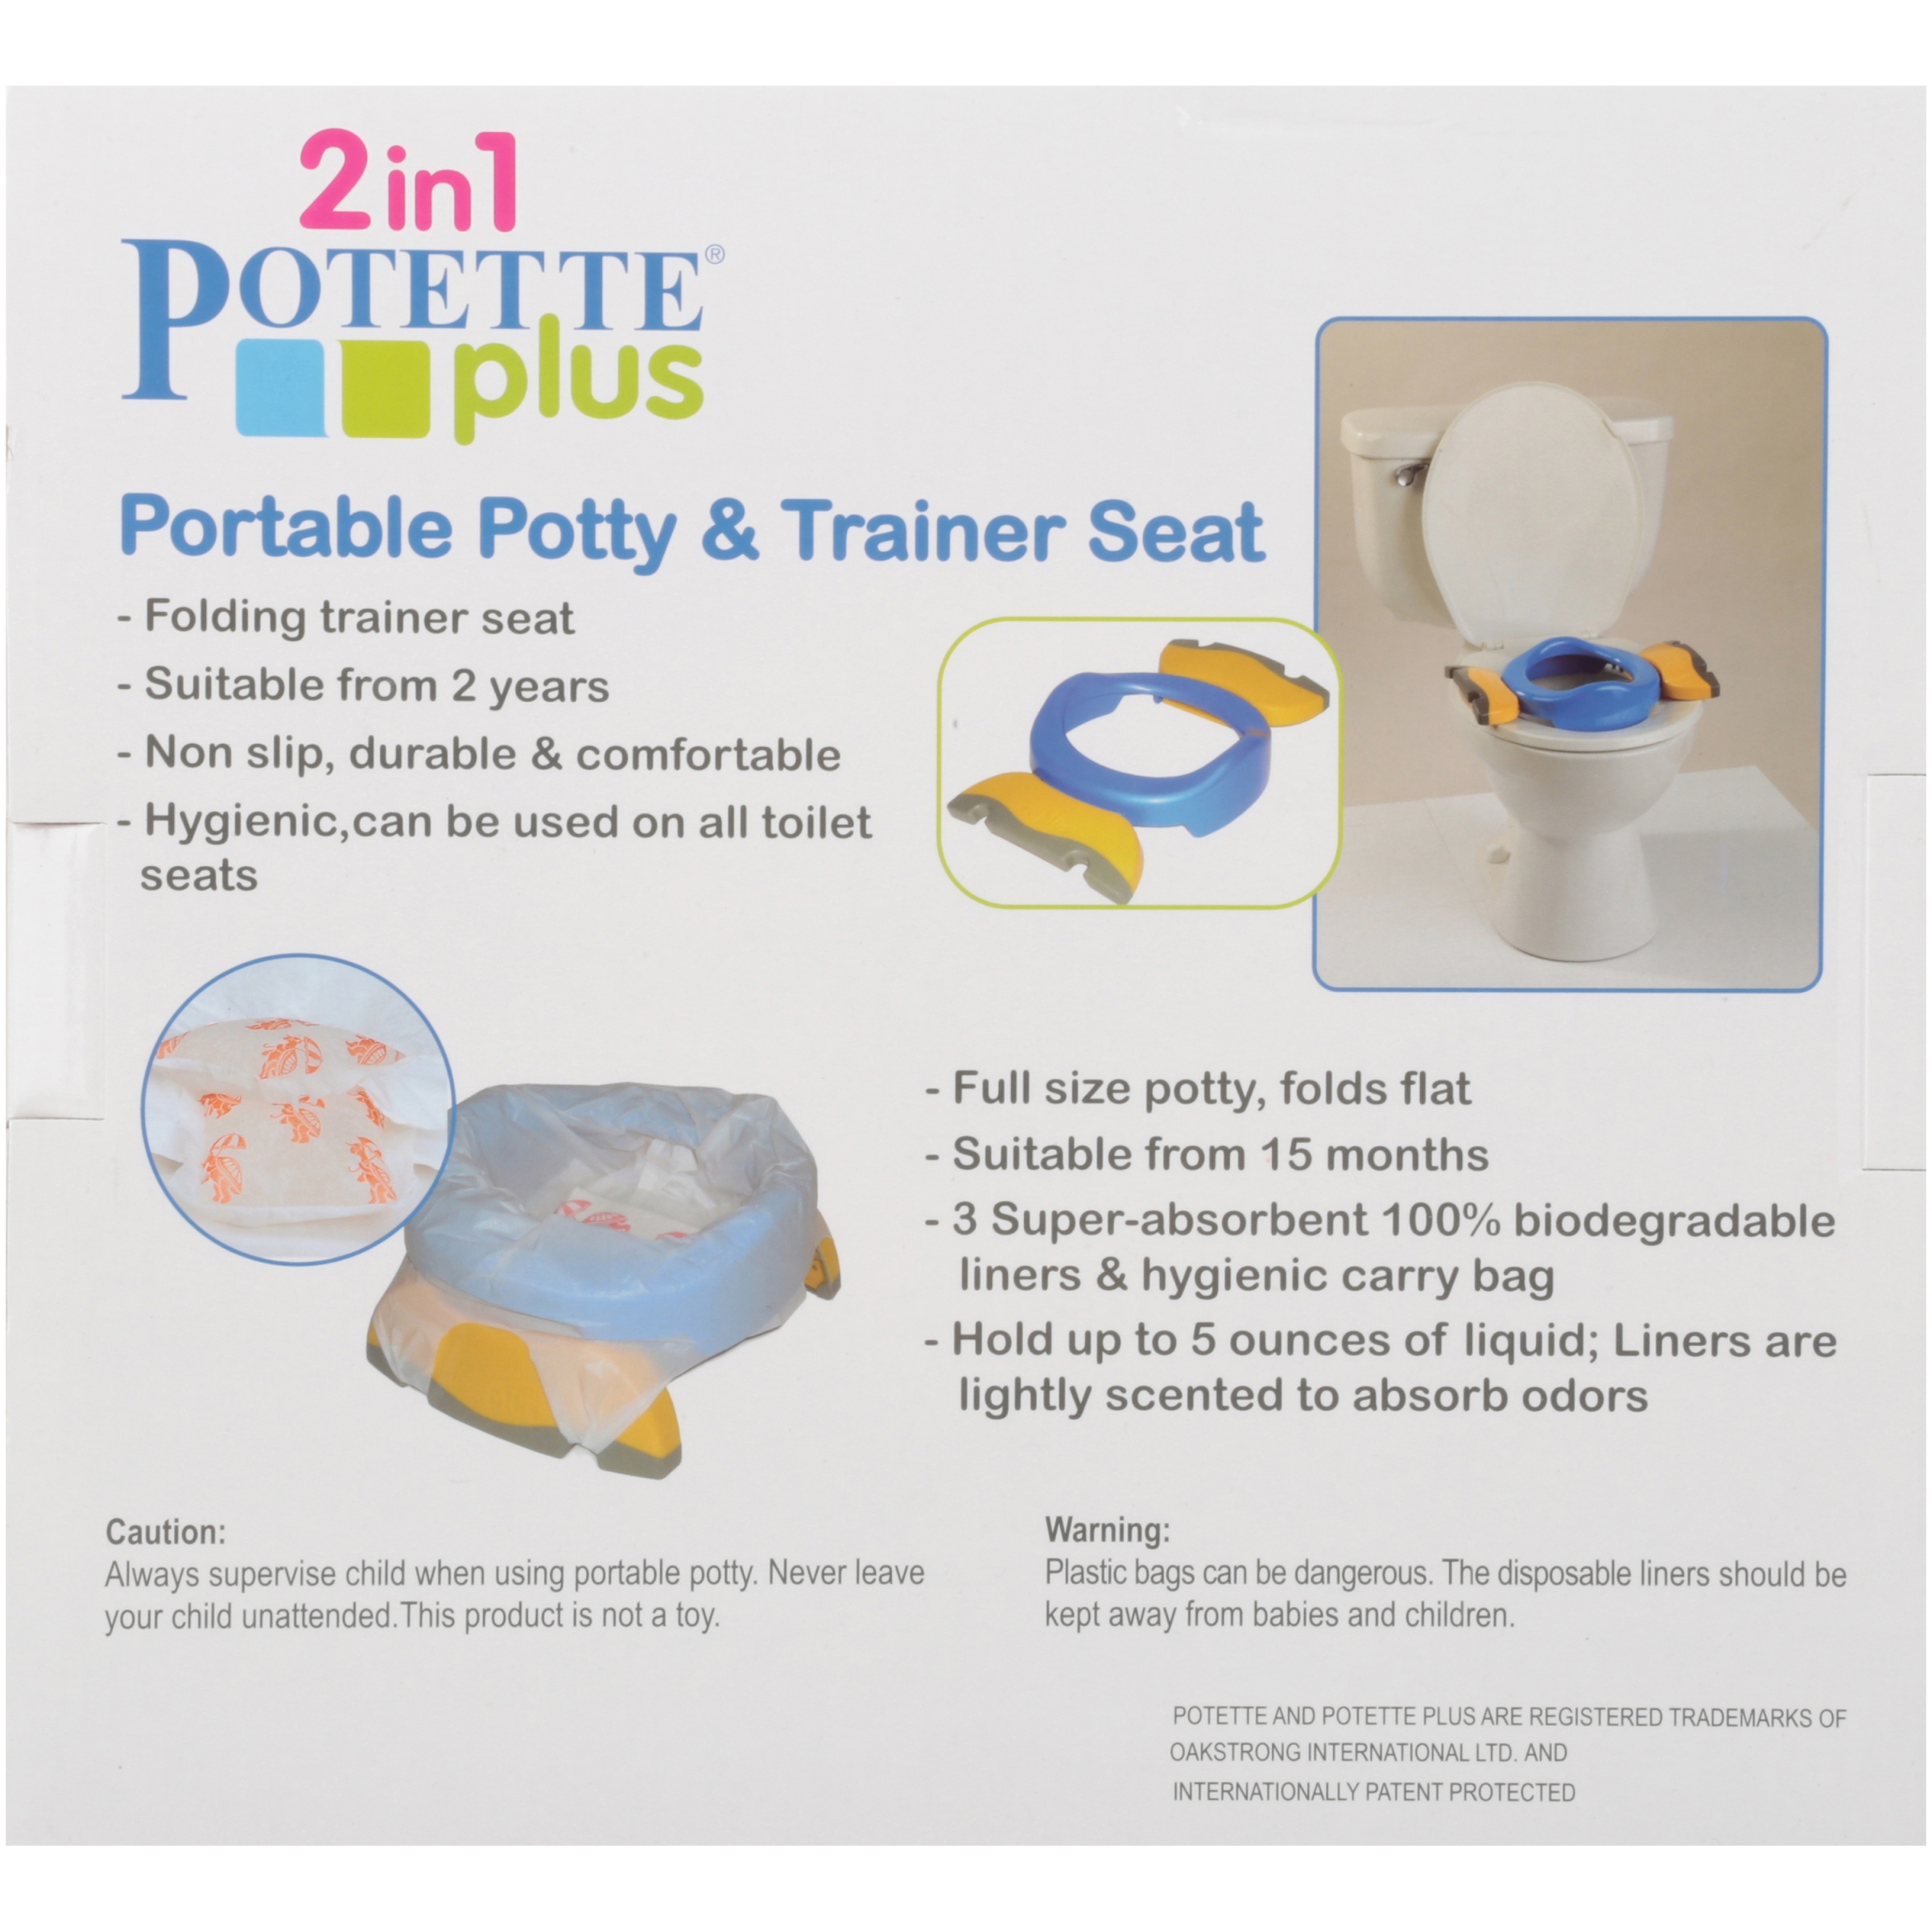 Mr. Petey Potette 2-in-1 Potty Training Kit in Green - image 4 of 4